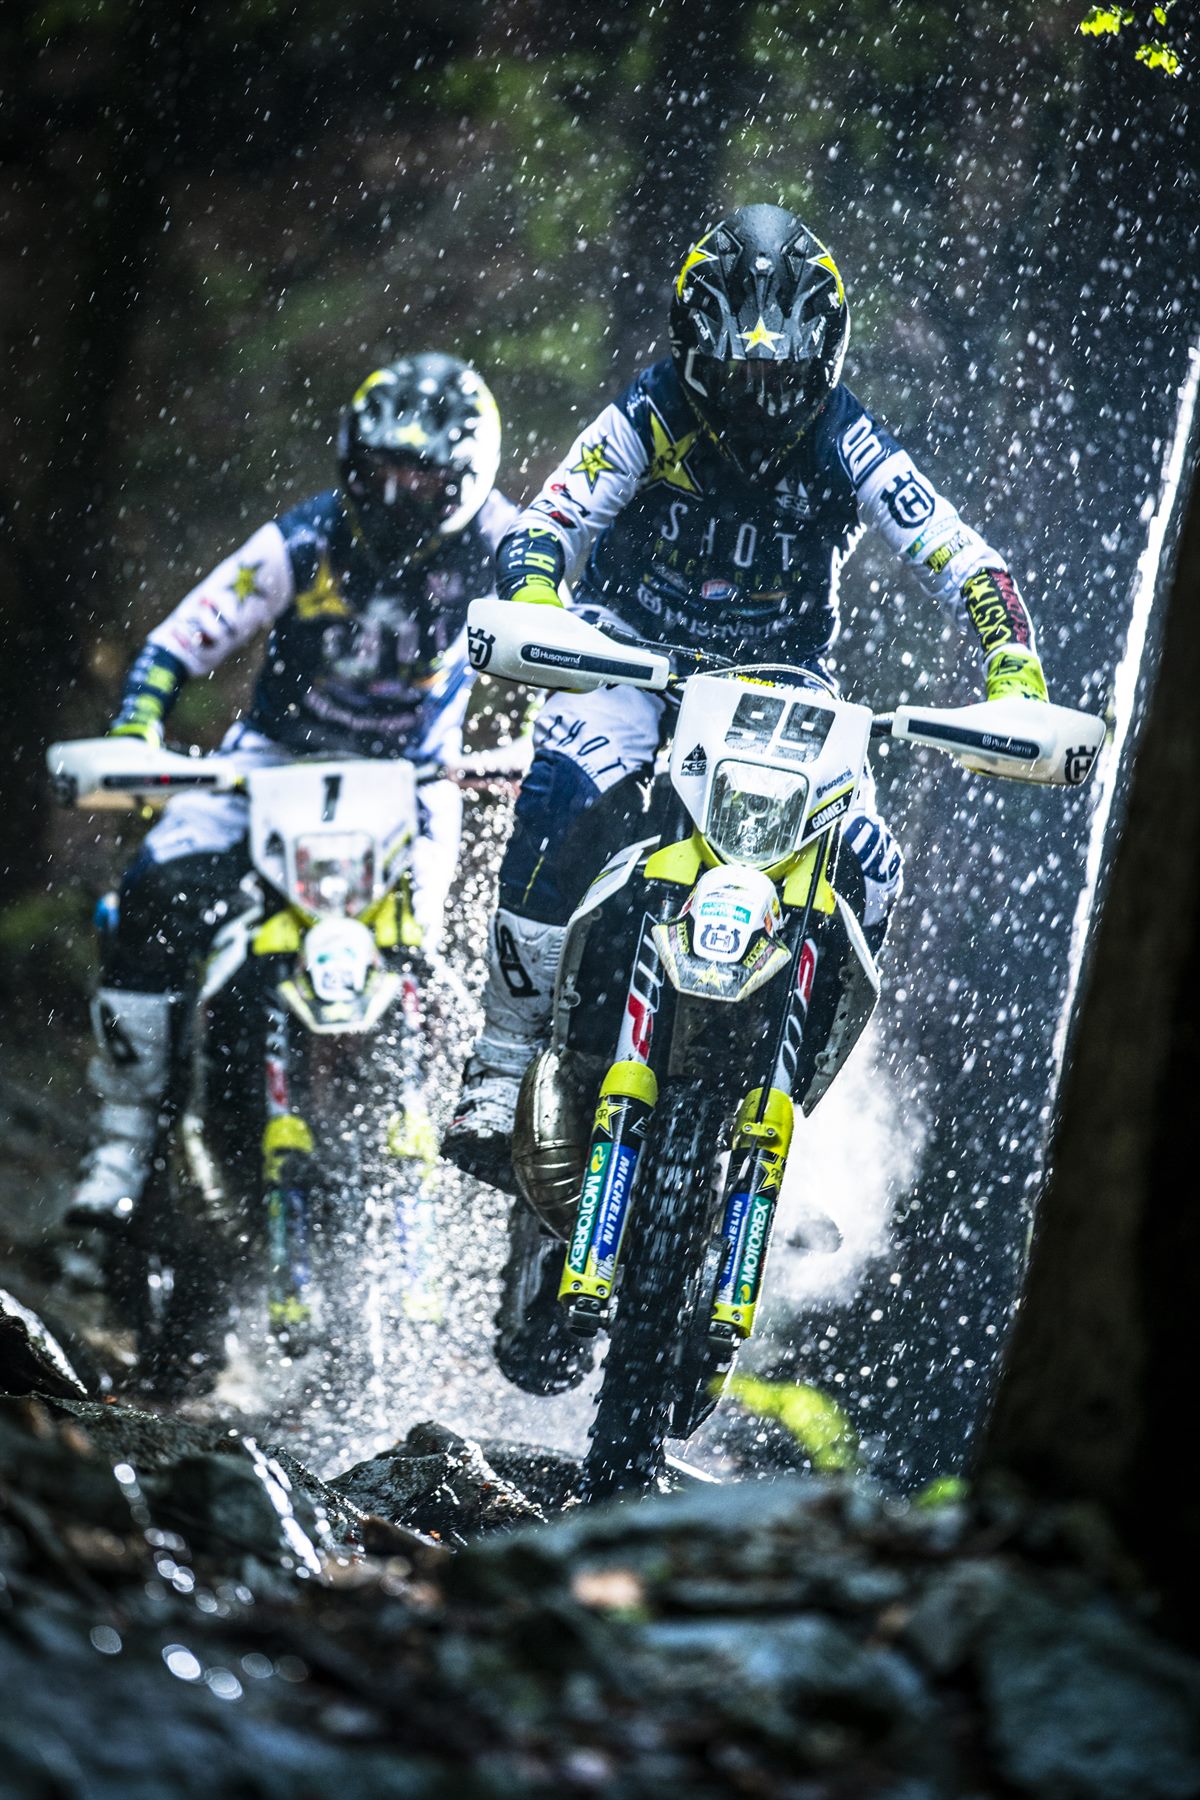 ROCKSTAR ENERGY HUSQVARNA FACTORY RACING SET FOR SECOND SEASON OF WESS COMPETITION